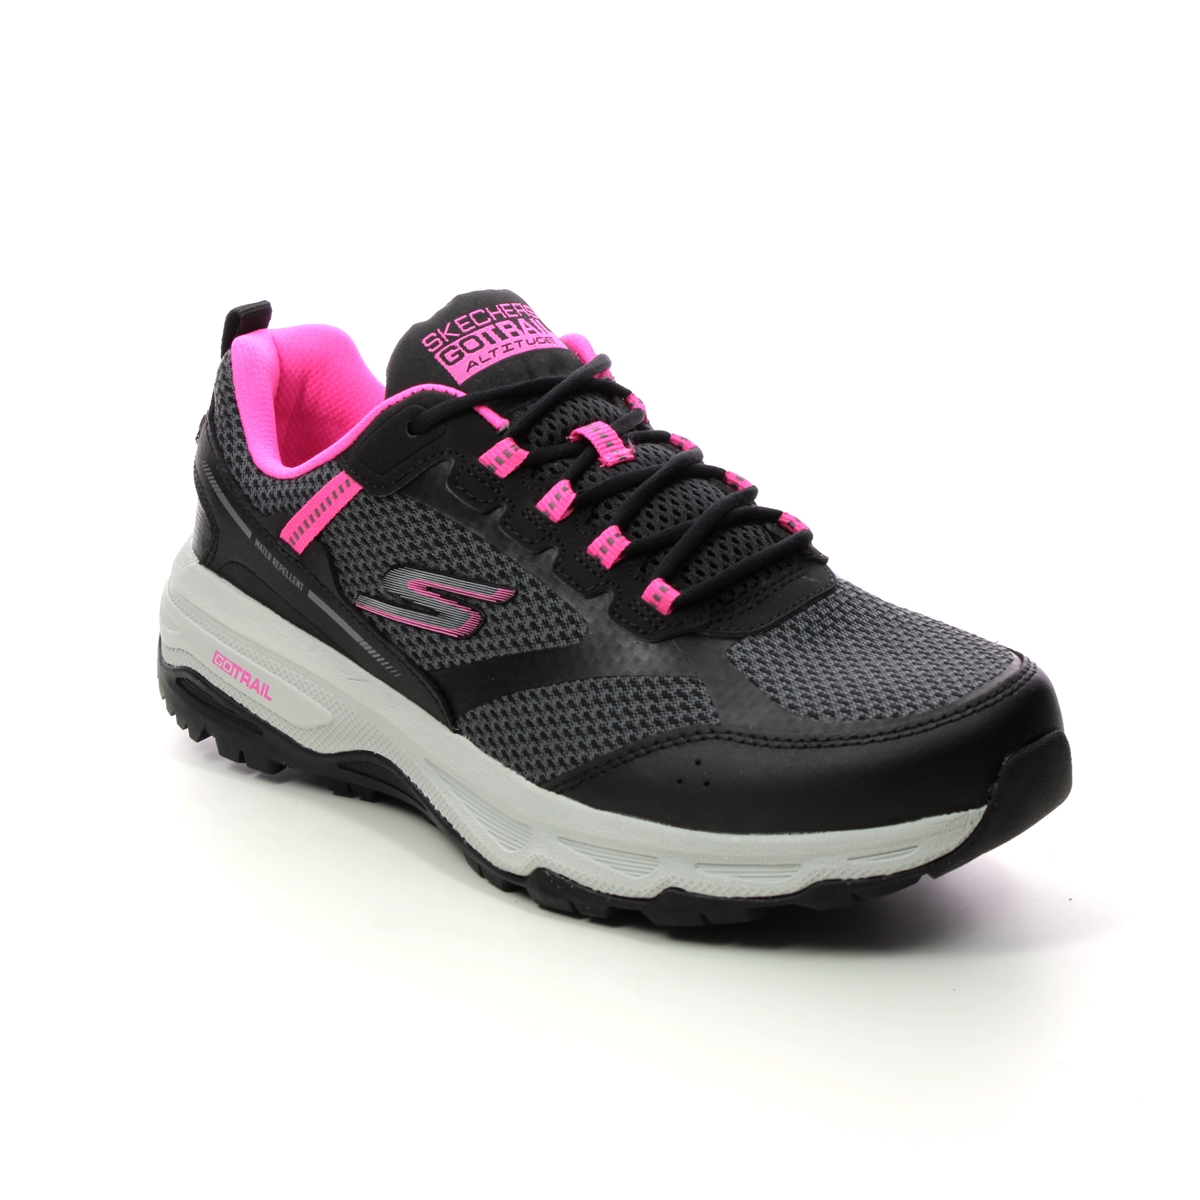 Skechers Go Run Trail Black Pink Womens Trainers 128200 In Size 6.5 In Plain Black Pink